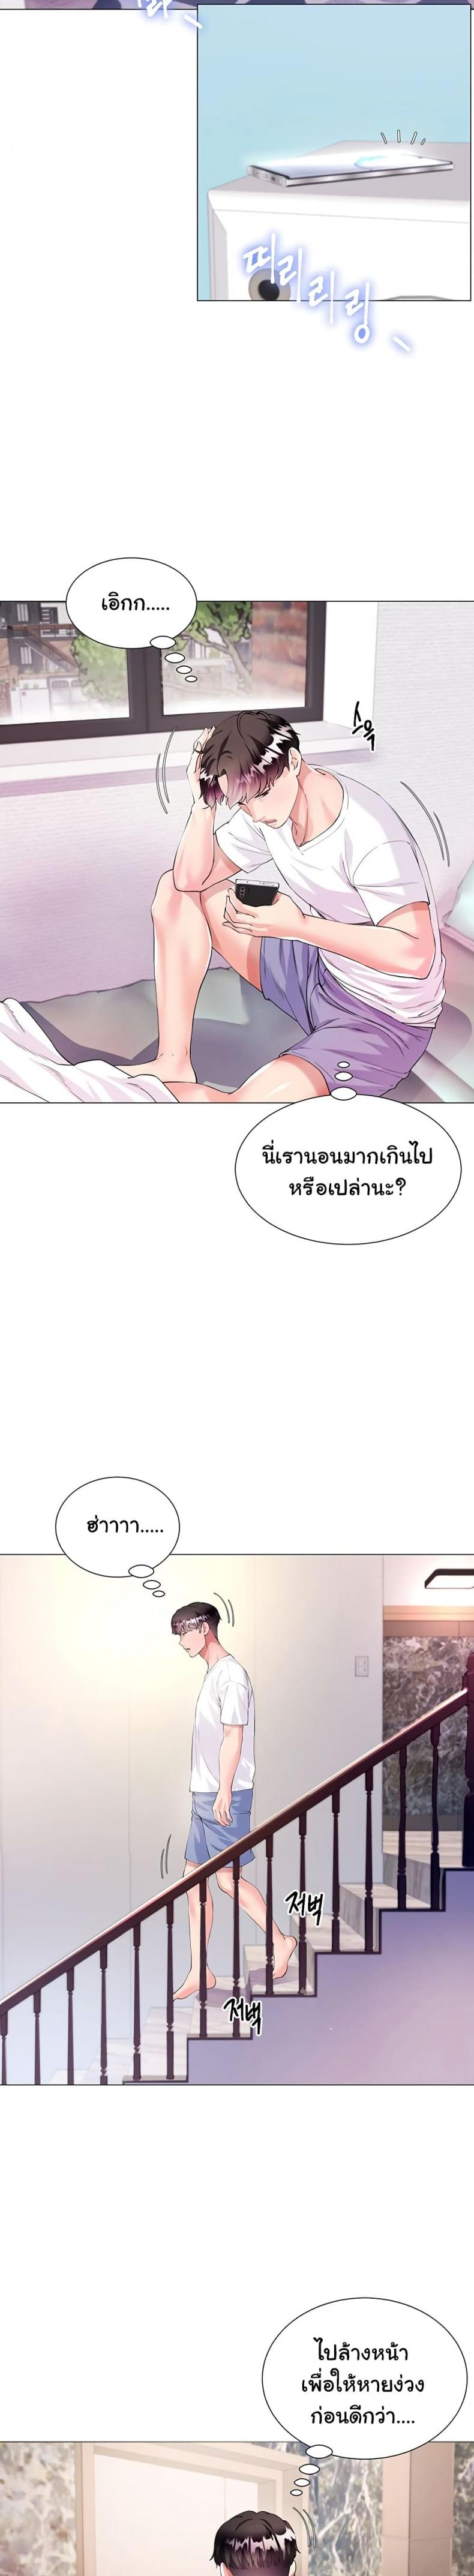 My Sister-in-law’s Skirt 1 ภาพที่ 11